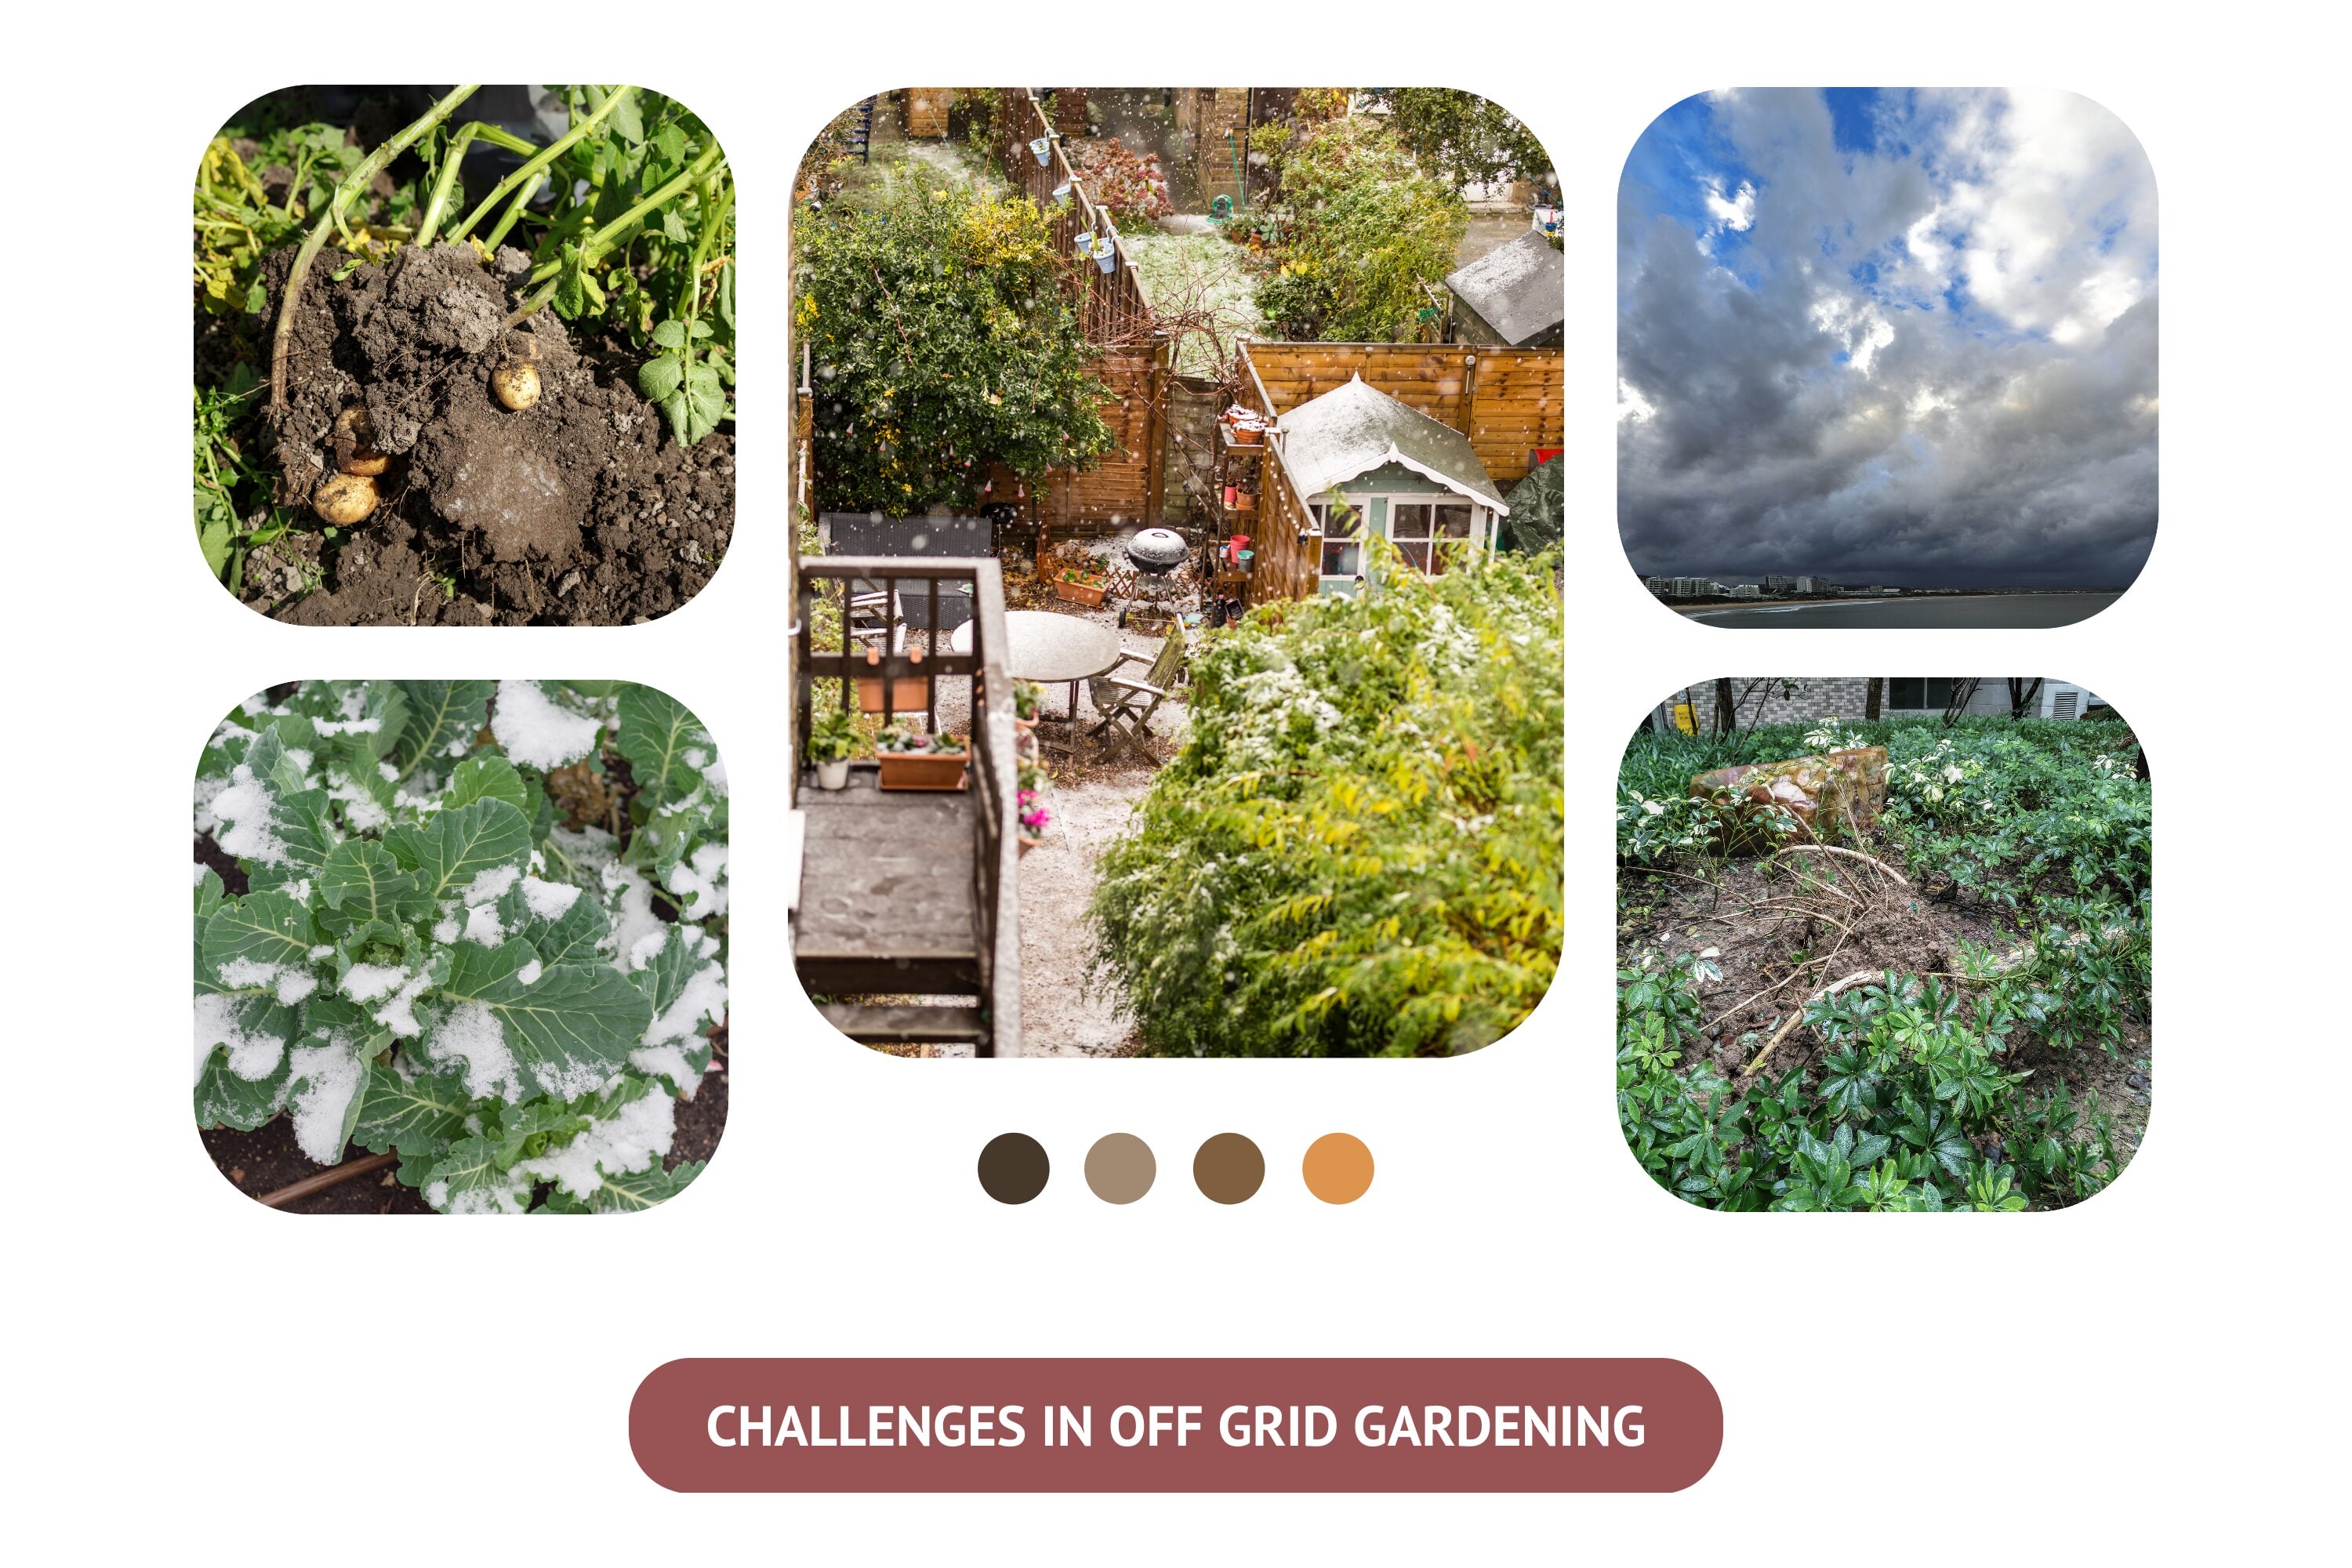 The difficulties of off-grid gardening pose an exciting opportunity for problem-solving and innovation.